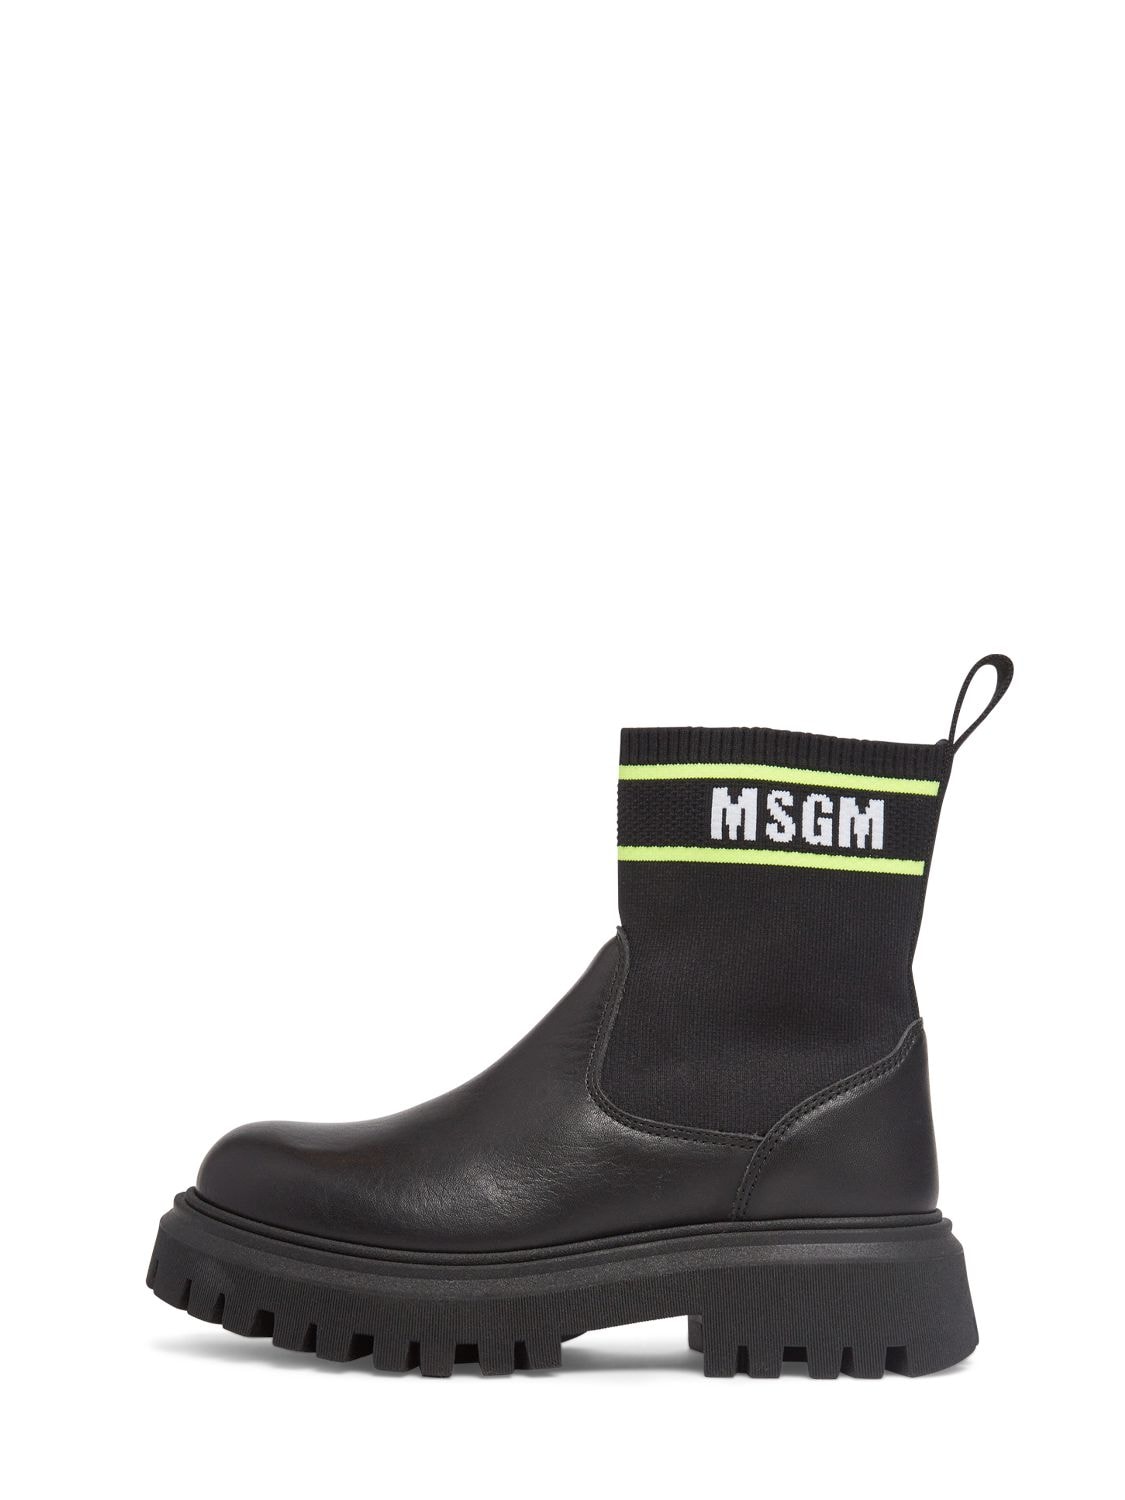 Image of Leather & Knit Pull On Boots W/logo